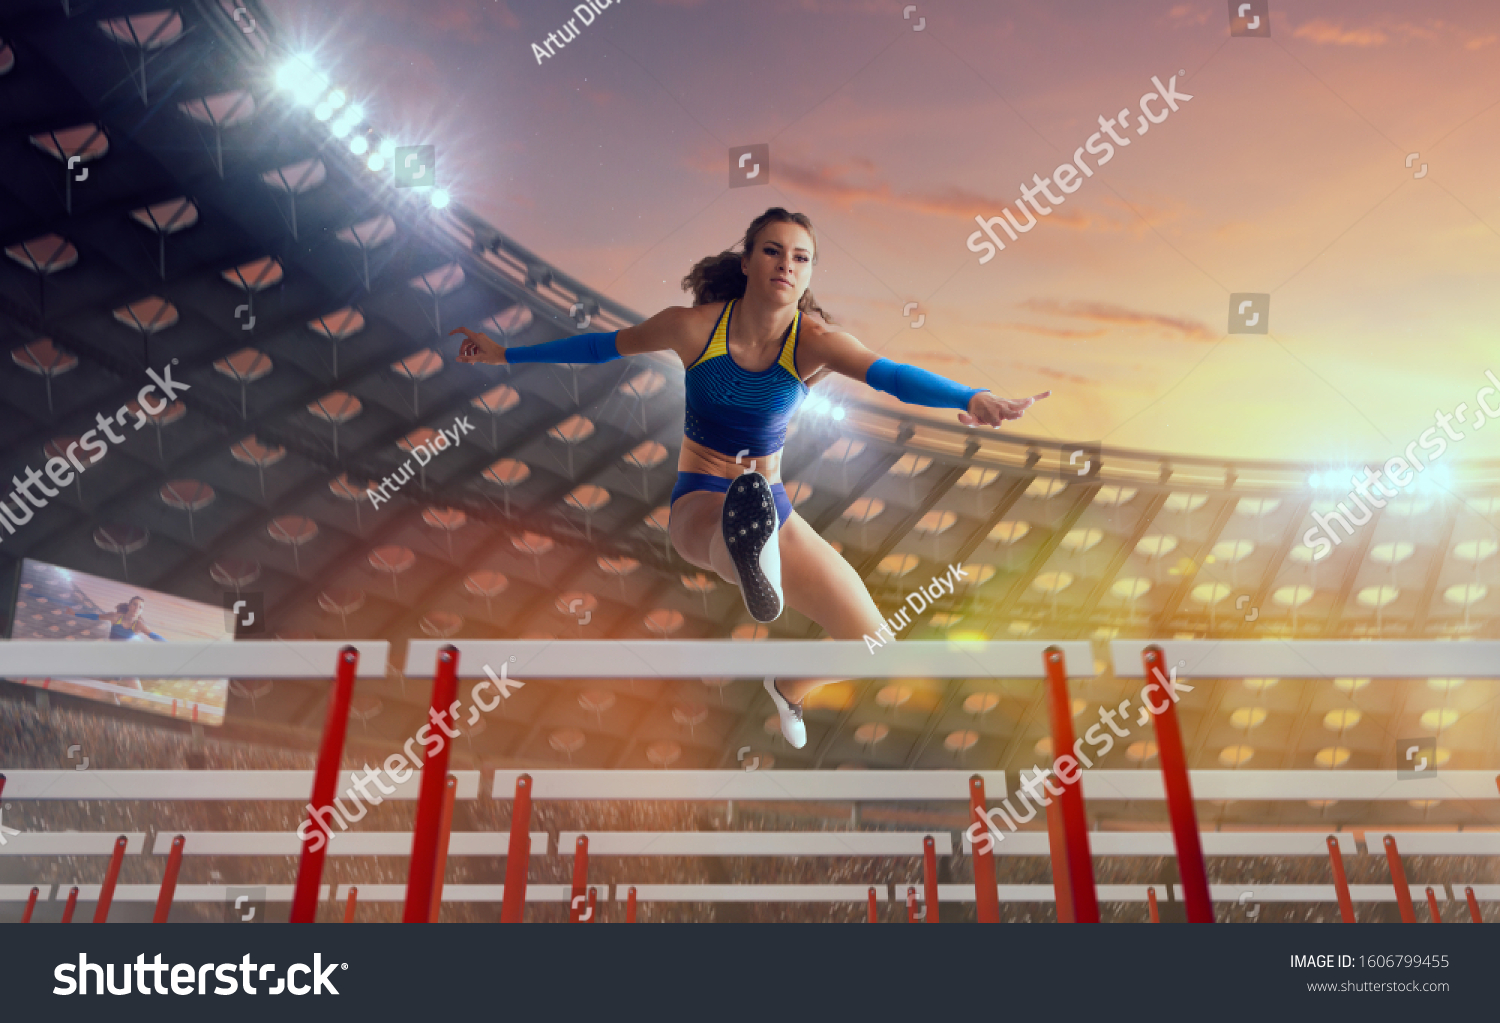 Athlete woman athlete jumps over the barrier at the running track in professional athletics stadium. #1606799455